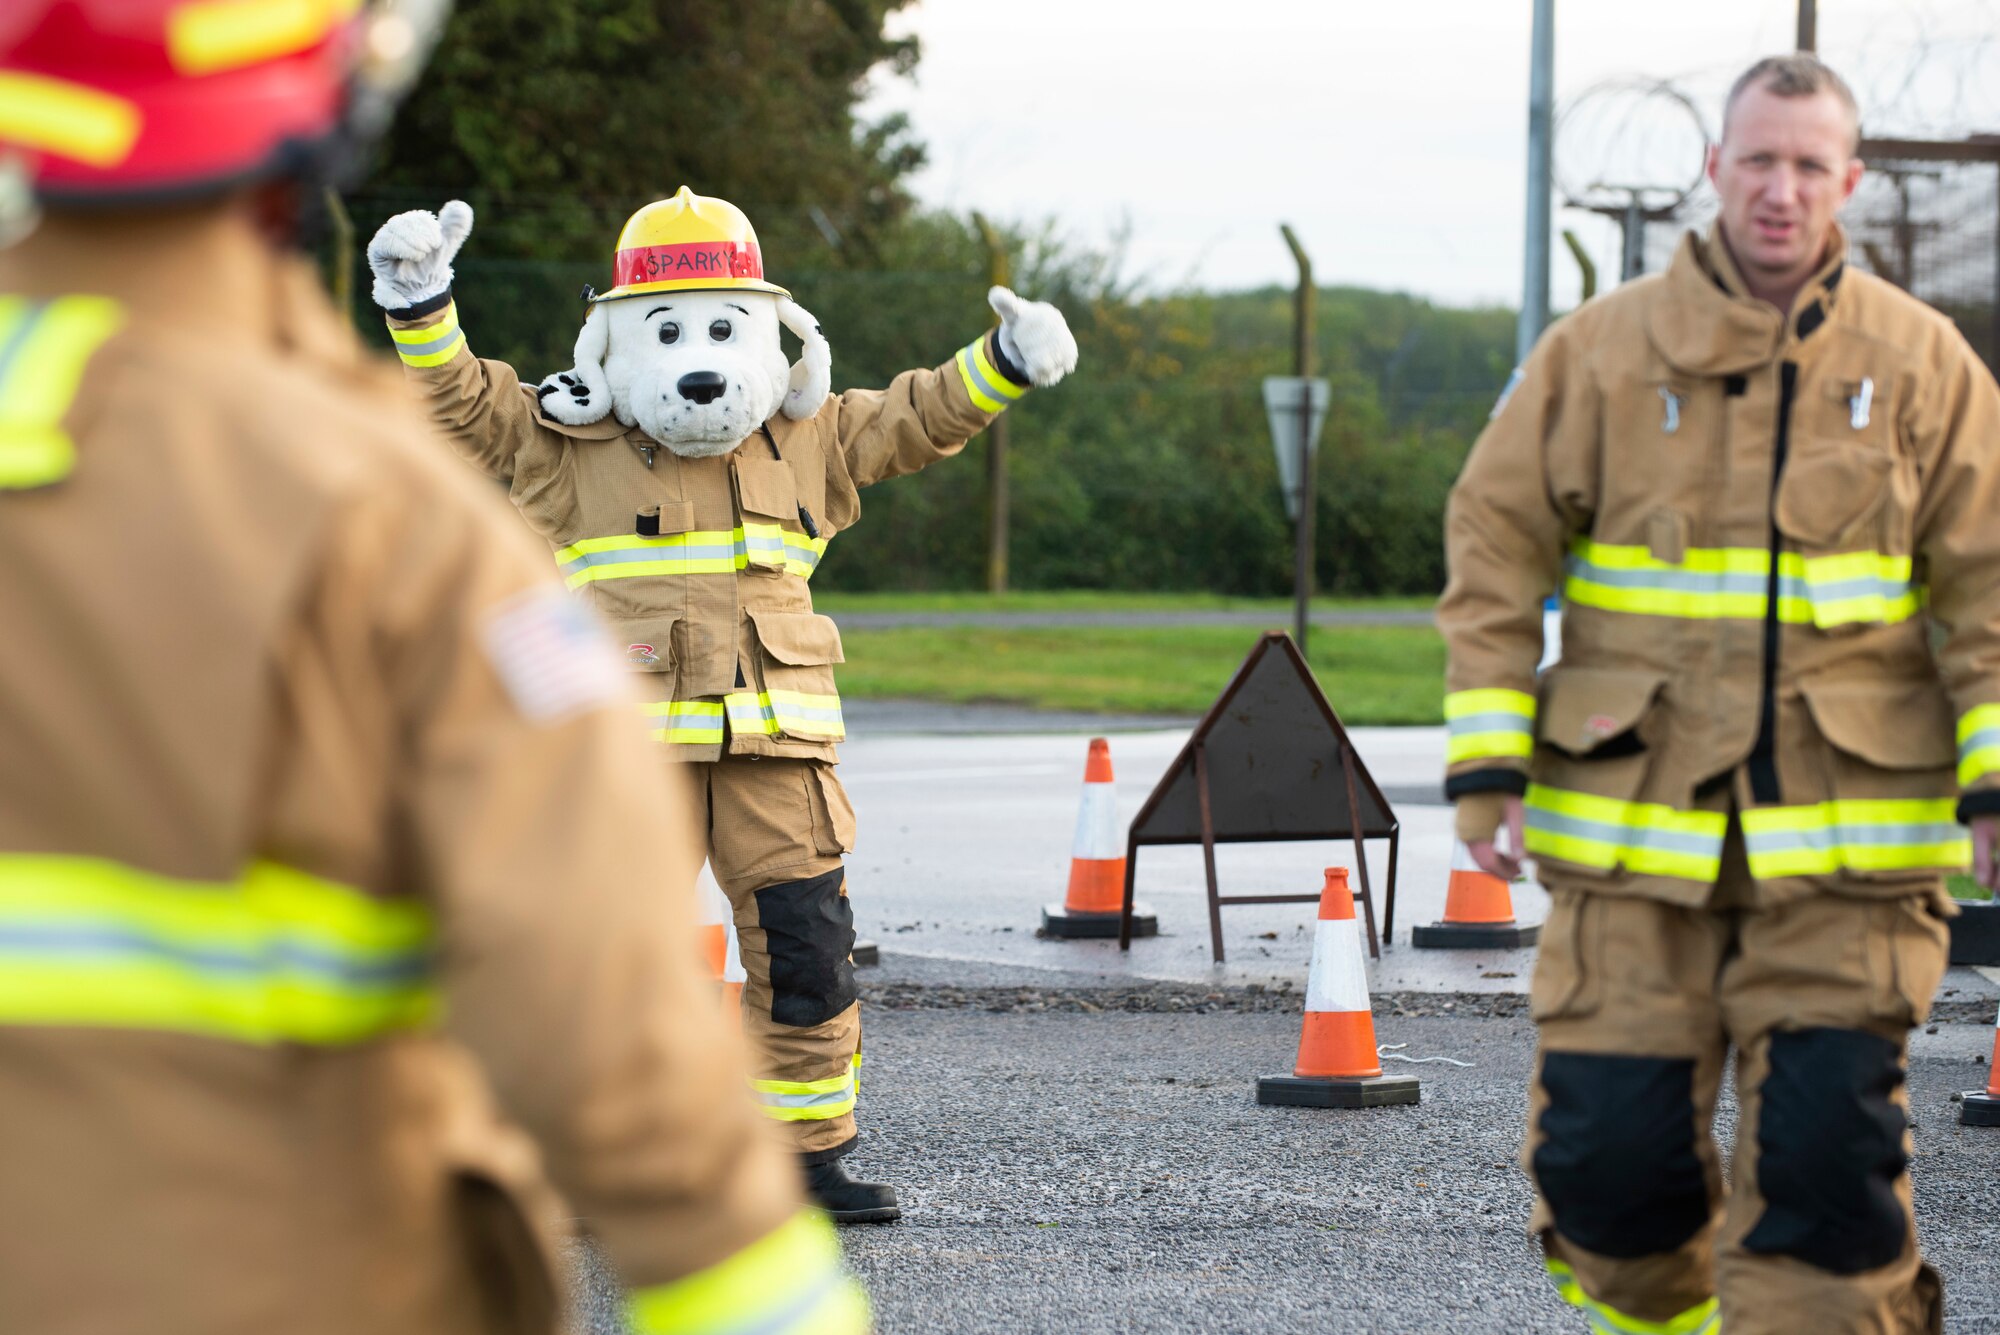 Sparky the Fire Dog and 423rd Civil Engineer Squadron firefighters welcome drivers to RAF Molesworth, England, Oct. 6, 2020 during Fire Prevention Week 2020. Sparky was created for the National Fire Protection Association in 1951 to teach children and adults about fire safety. (U.S. Air Force photo by Senior Airman Jennifer Zima)